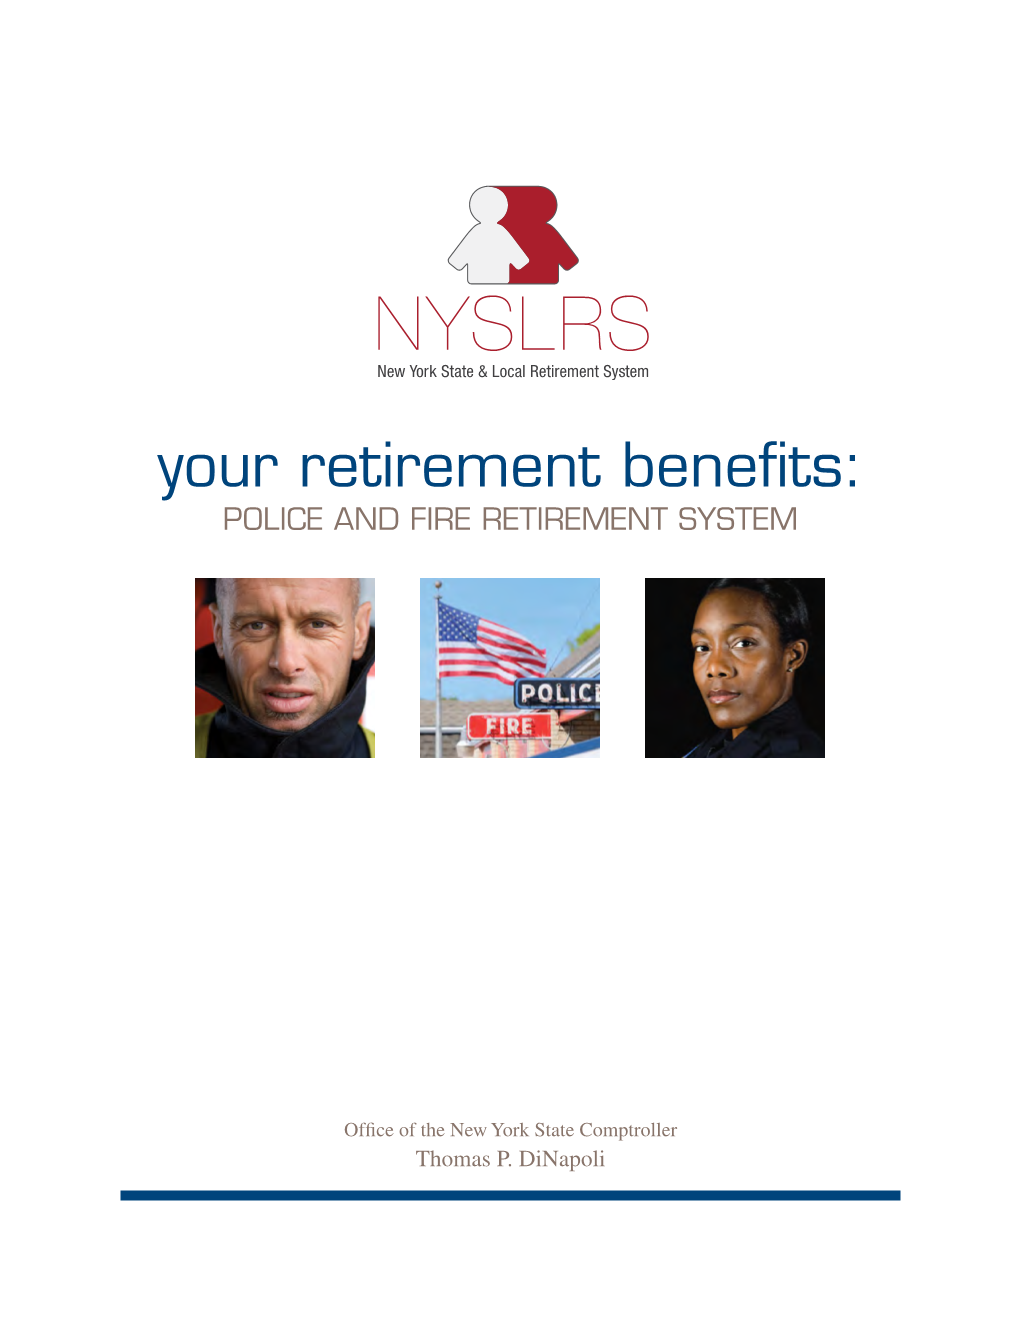 Retirement Benefits: POLICE and FIRE RETIREMENT SYSTEM